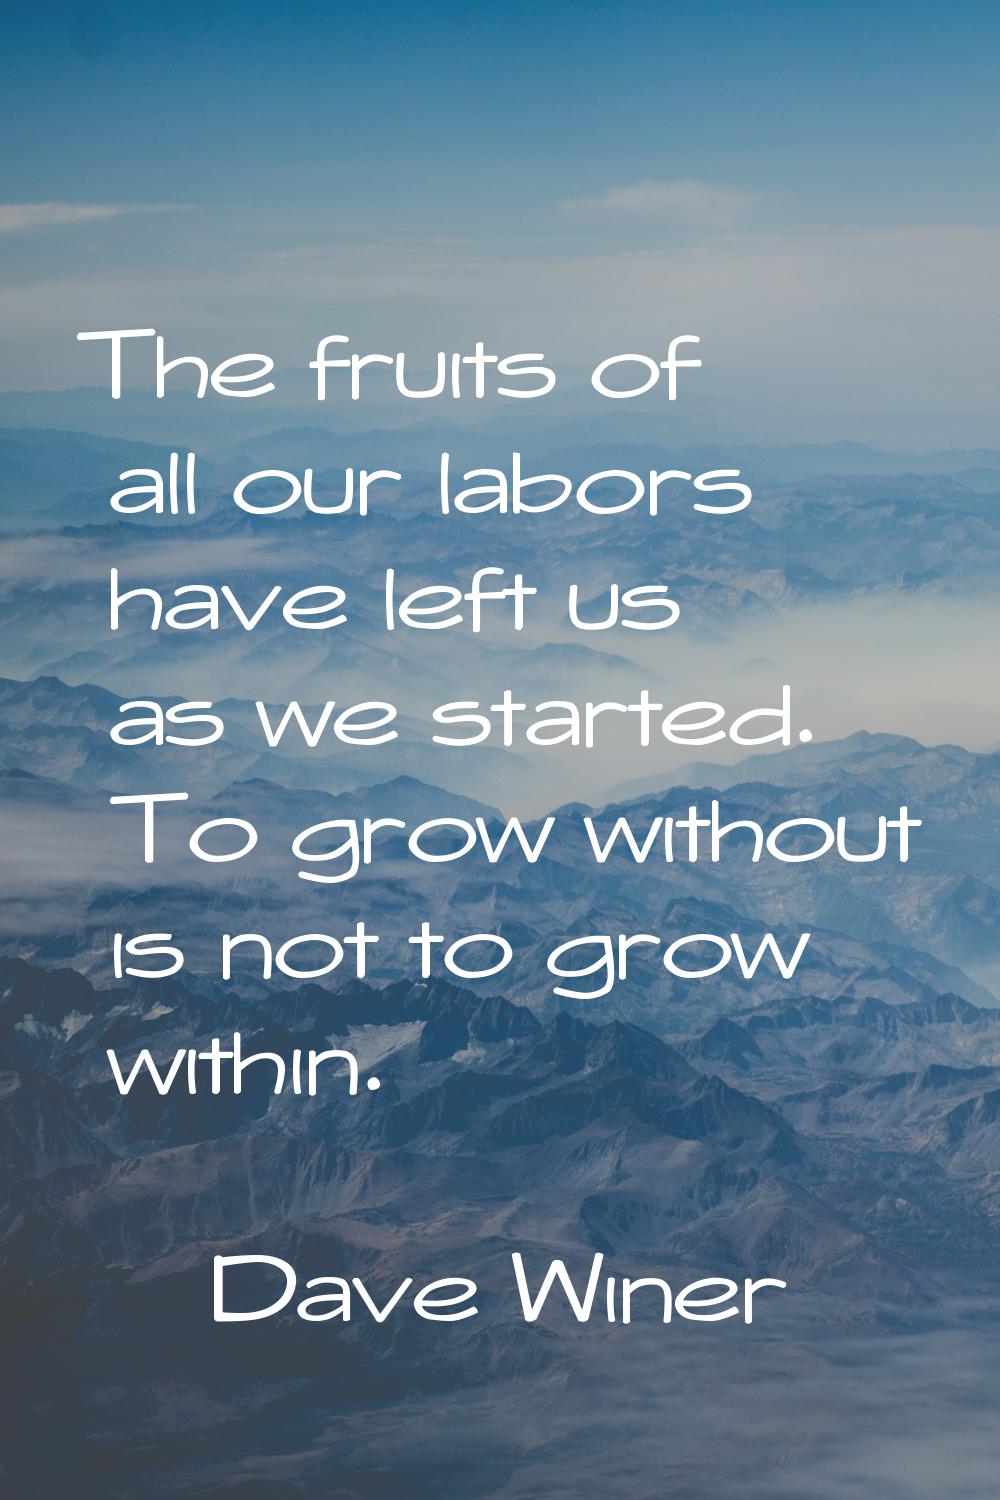 The fruits of all our labors have left us as we started. To grow without is not to grow within.